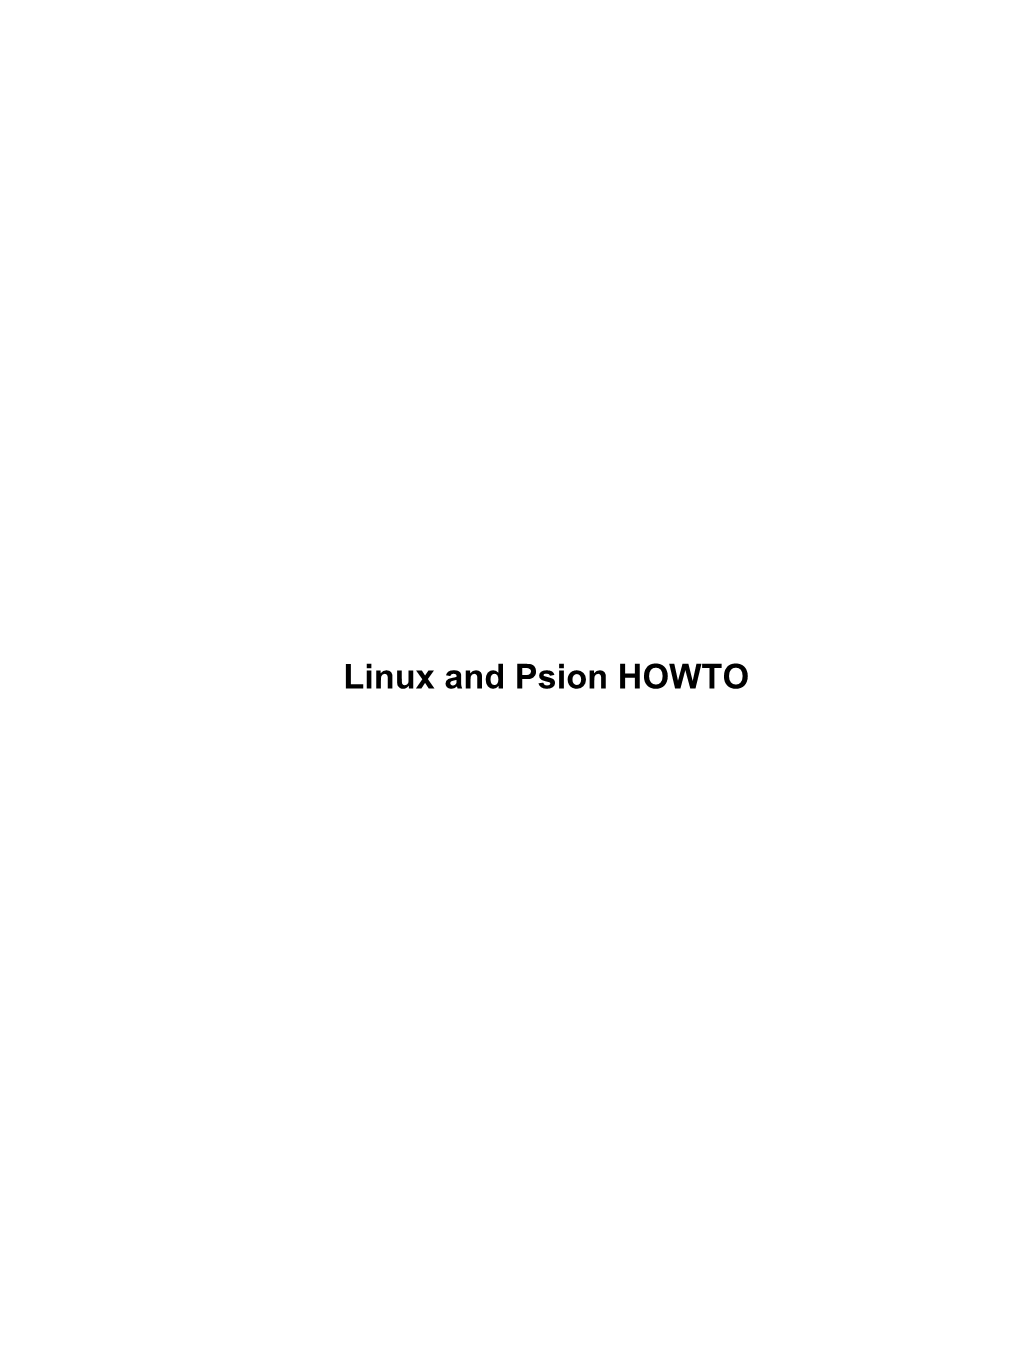 Psion-HOWTO.Pdf